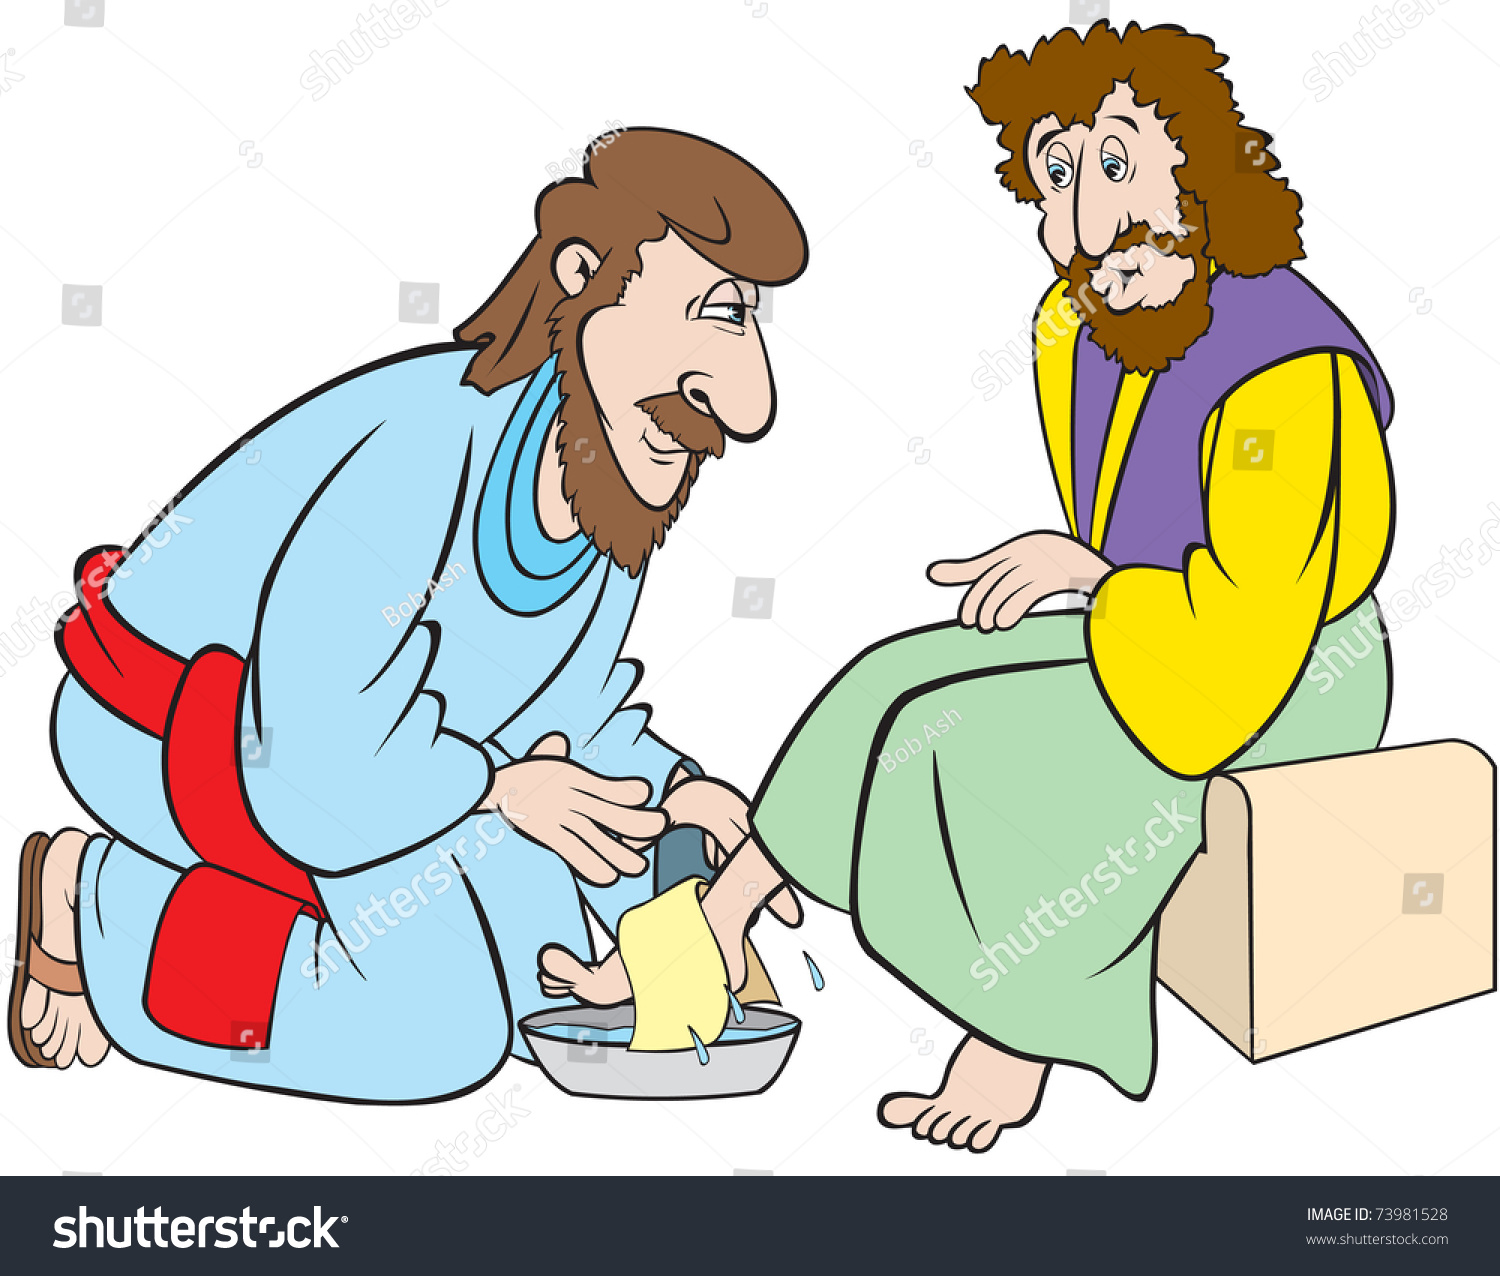 clipart of jesus washing the disciples feet - photo #24